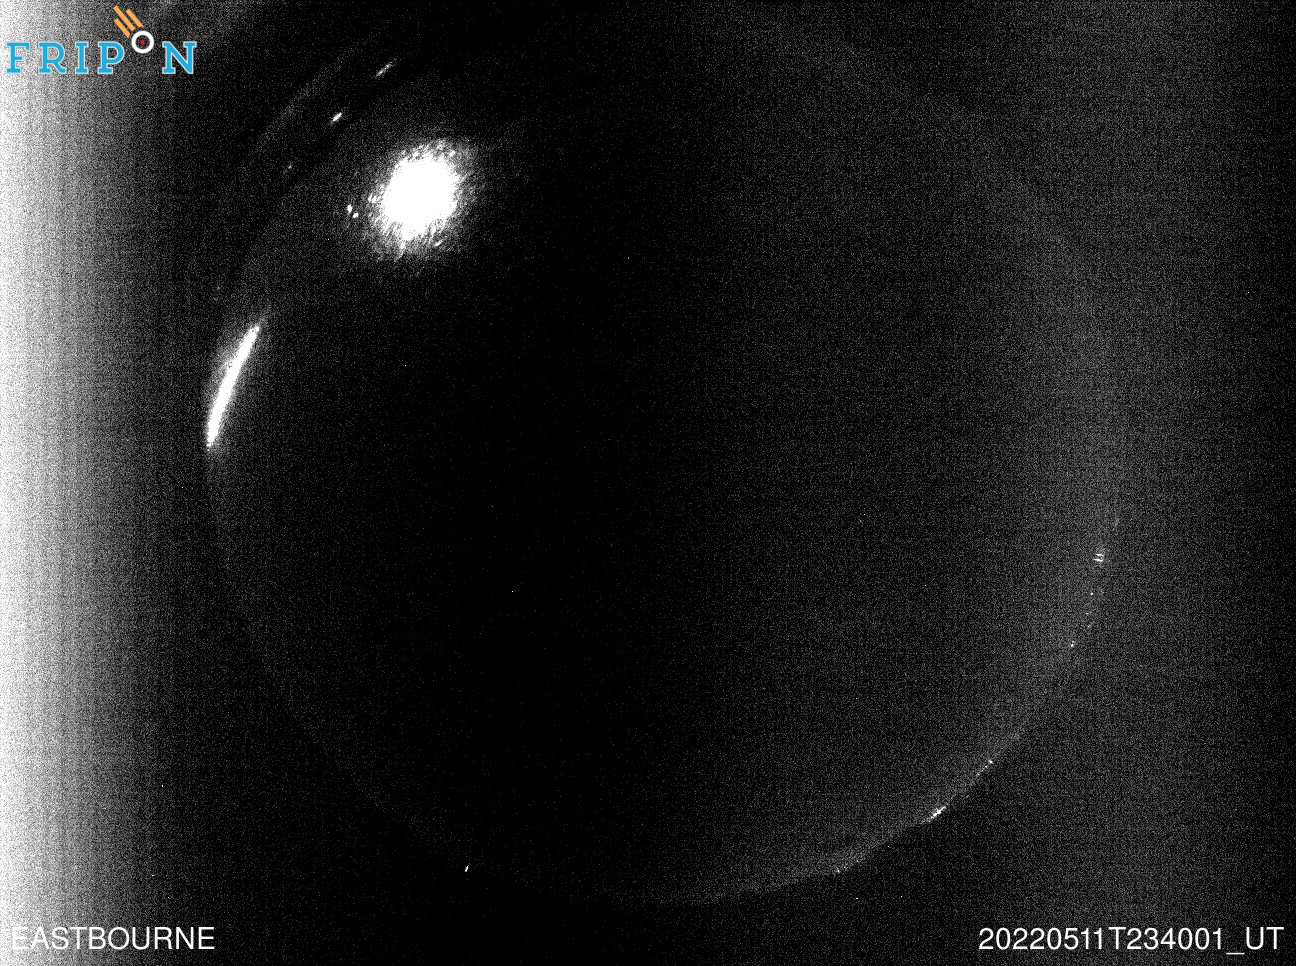 Figure 2a- May 11th, 2022, 23h 40min UT fireball captured by Fripon video station in Eastbourne (UK). Credit: SCAMP